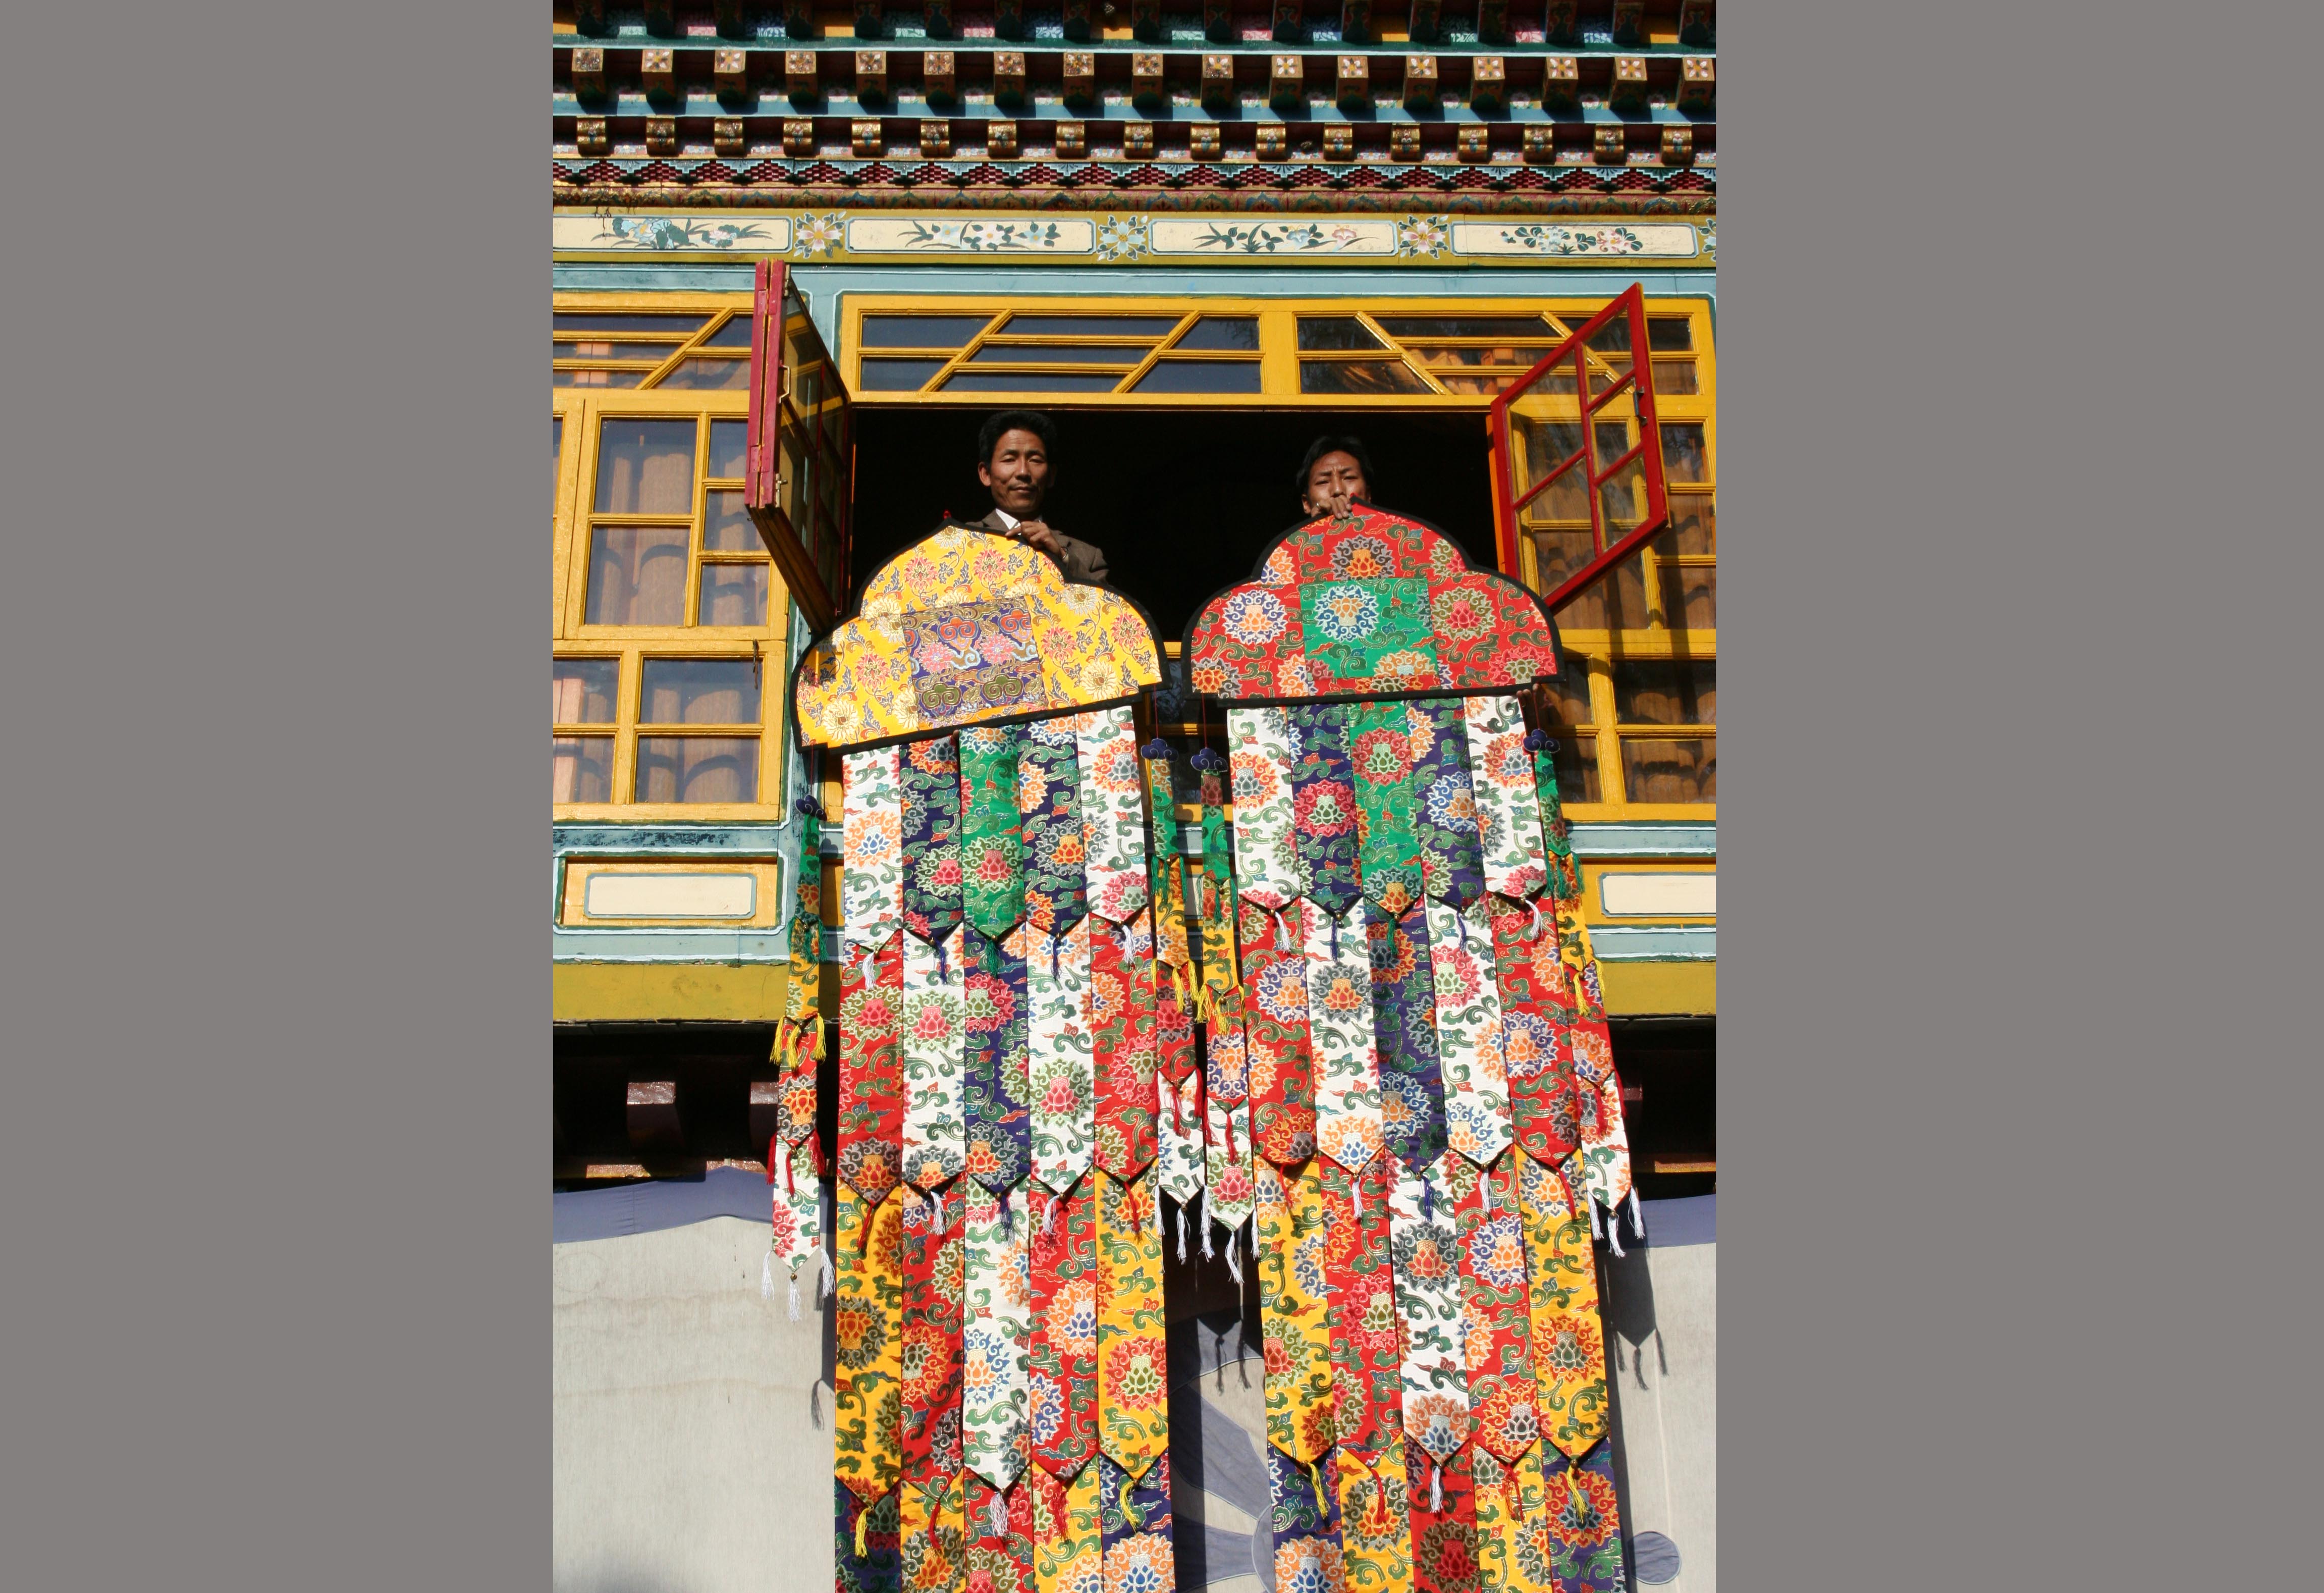 The Great Kalachakra Tent: A Temple in Fabric